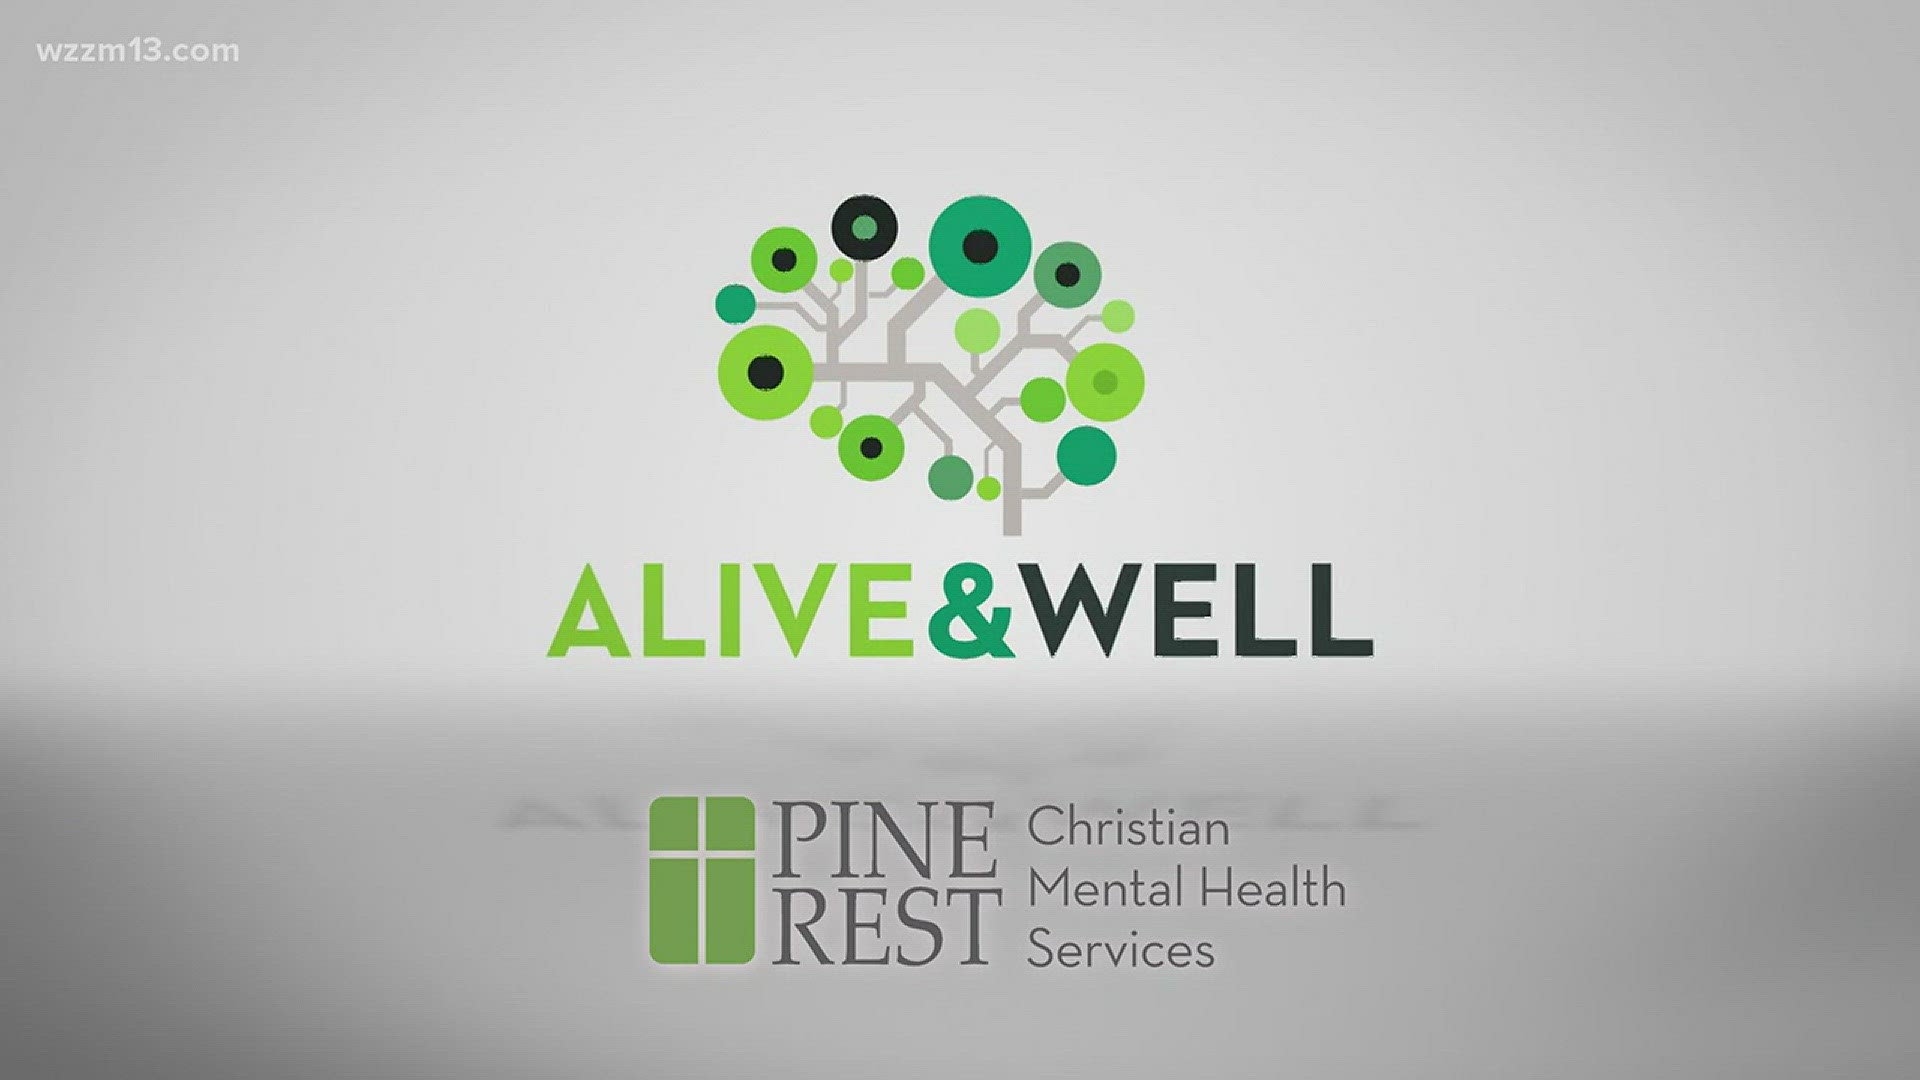 Alive and Well - Pine Rest